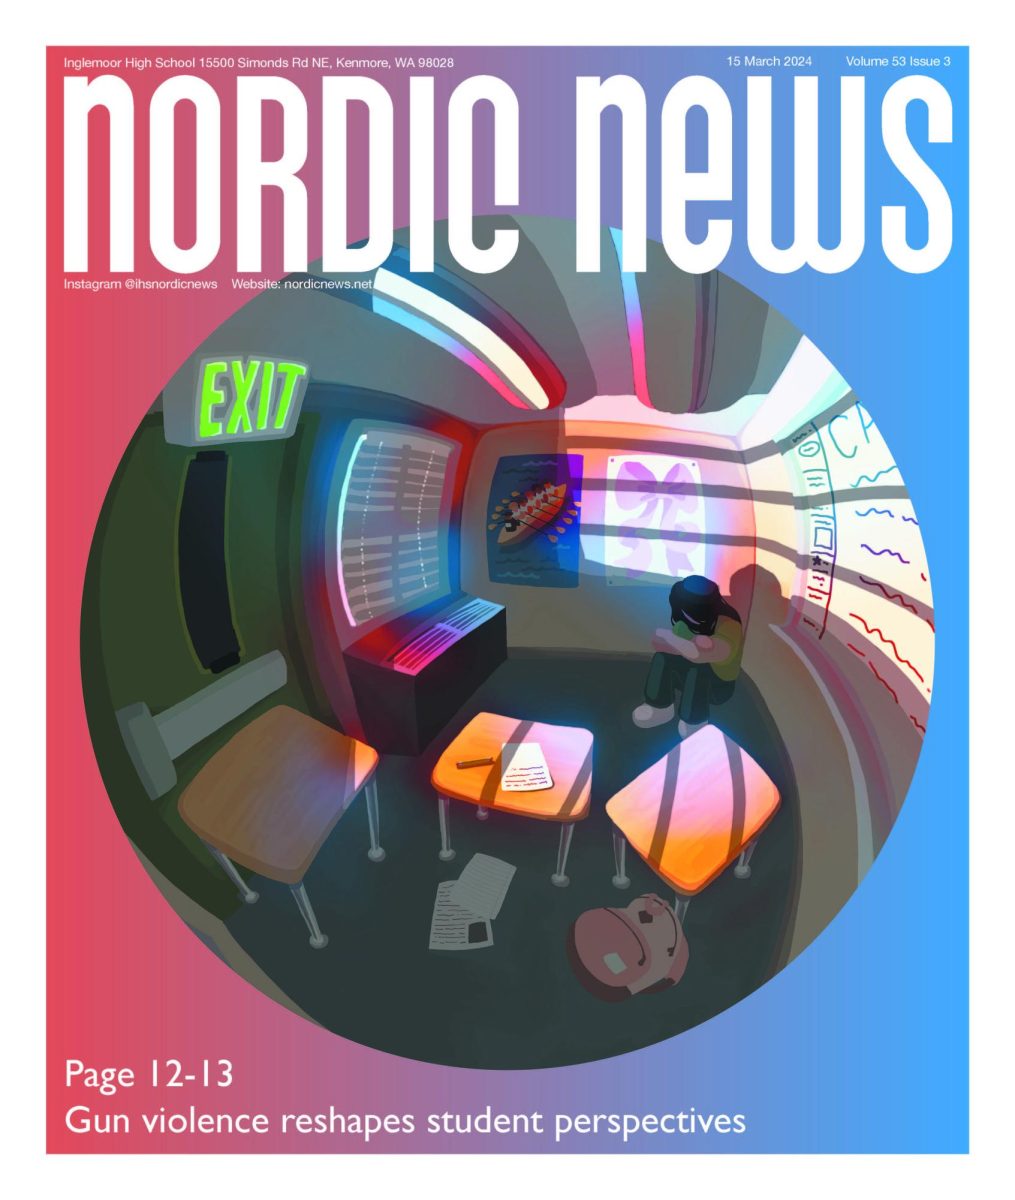 Nordic News, Volume 53, Issue 4: Gun violence reshapes student perspectives